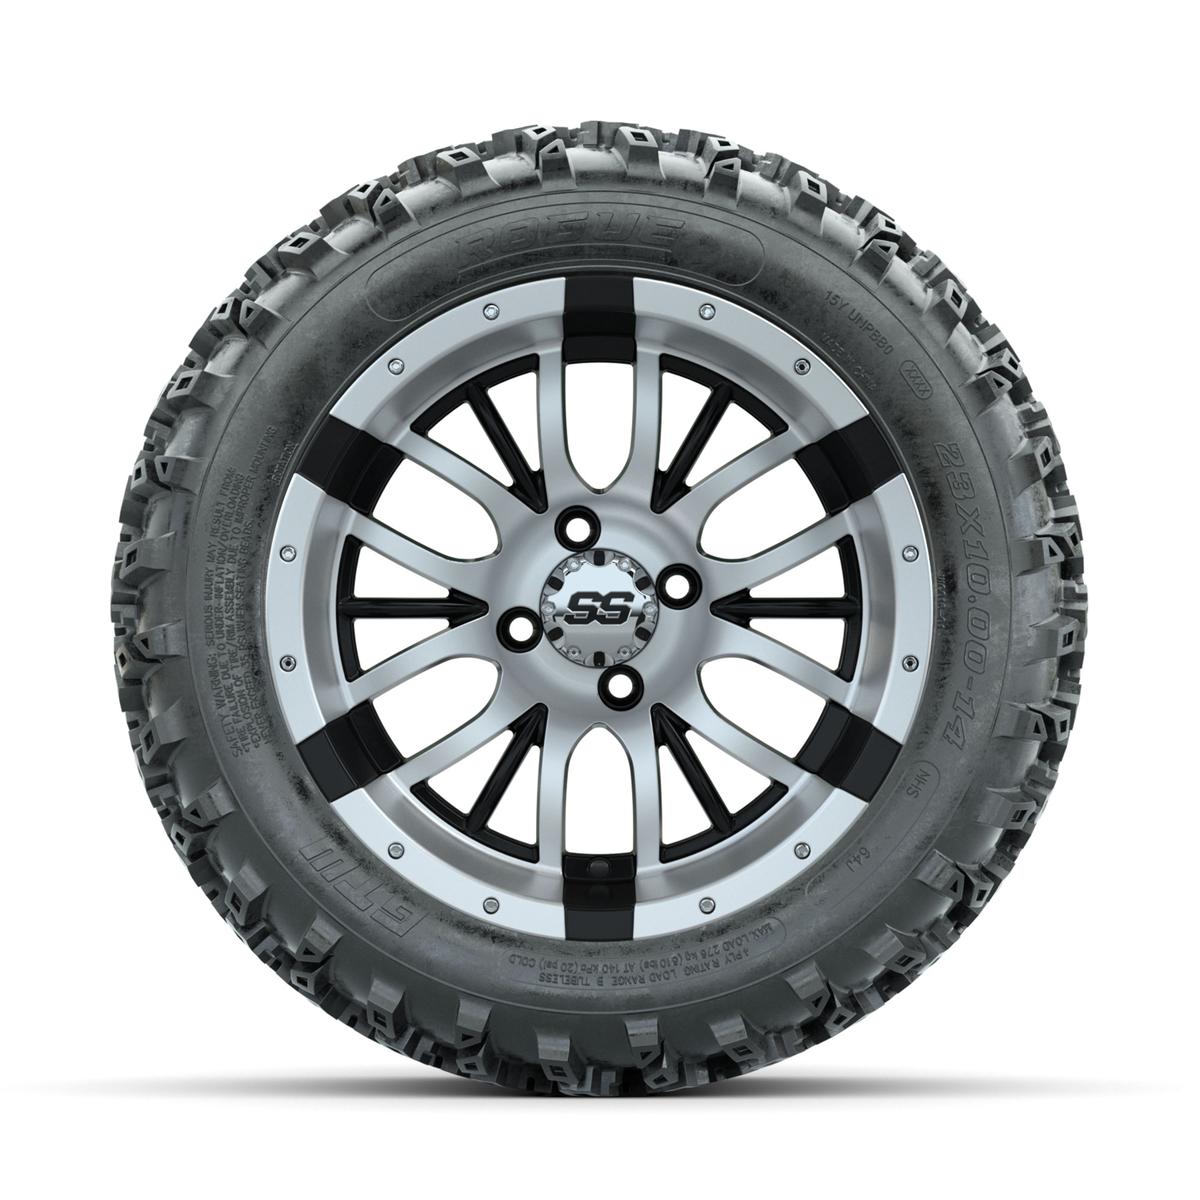 GTW Diesel Machined/Black 14 in Wheels with 23x10.00-14 Rogue All Terrain Tires – Full Set